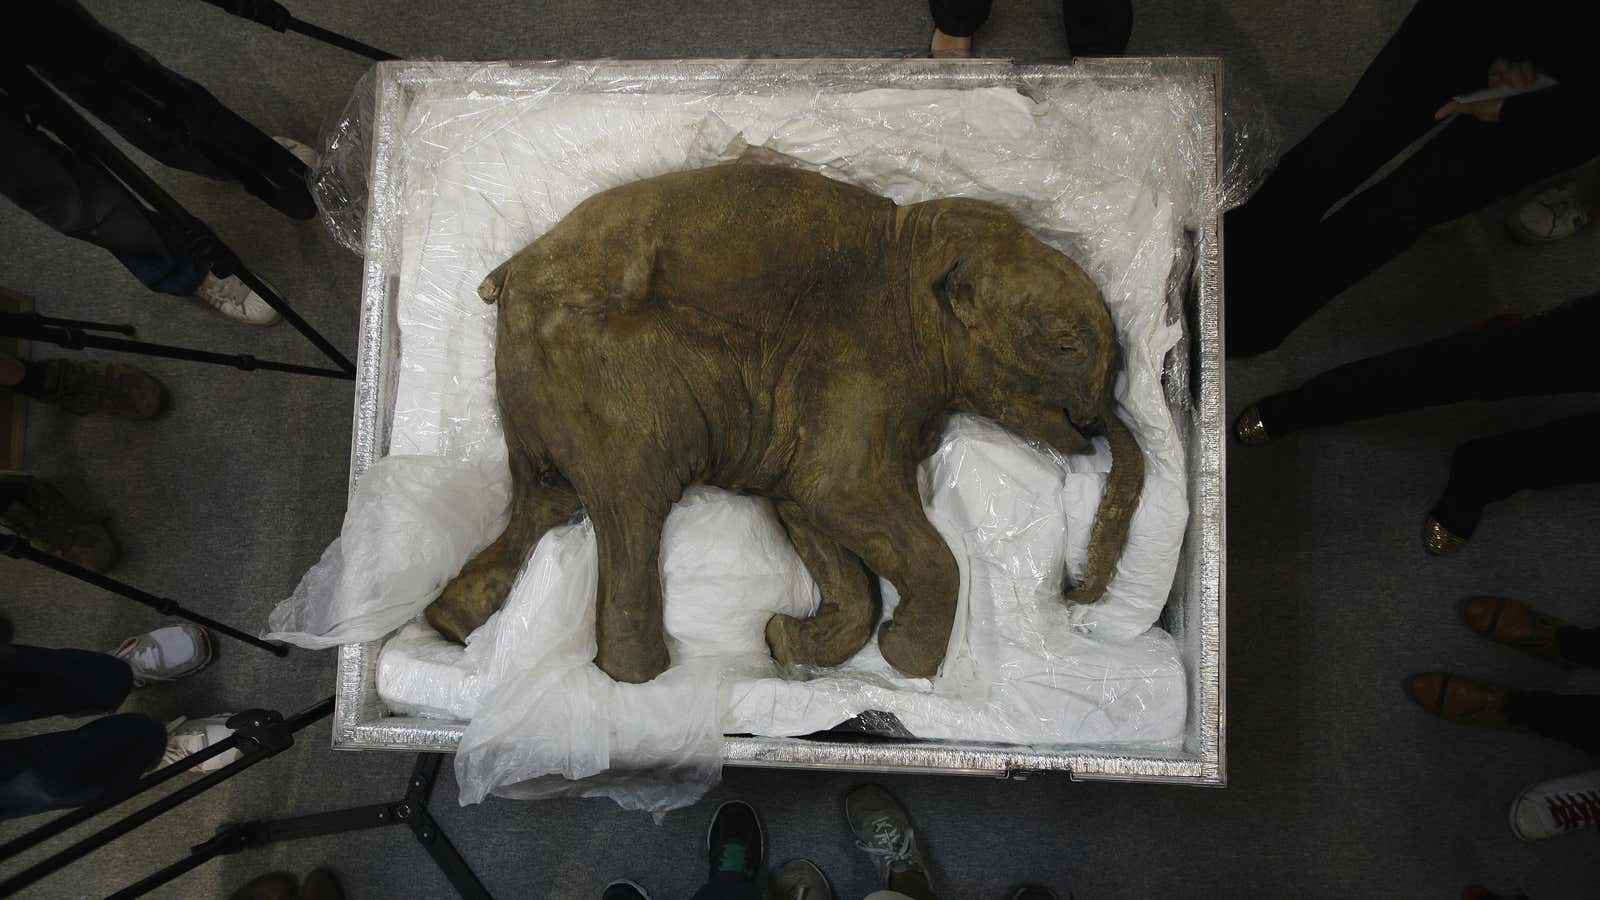 The carcass of a well-preserved baby mammoth.